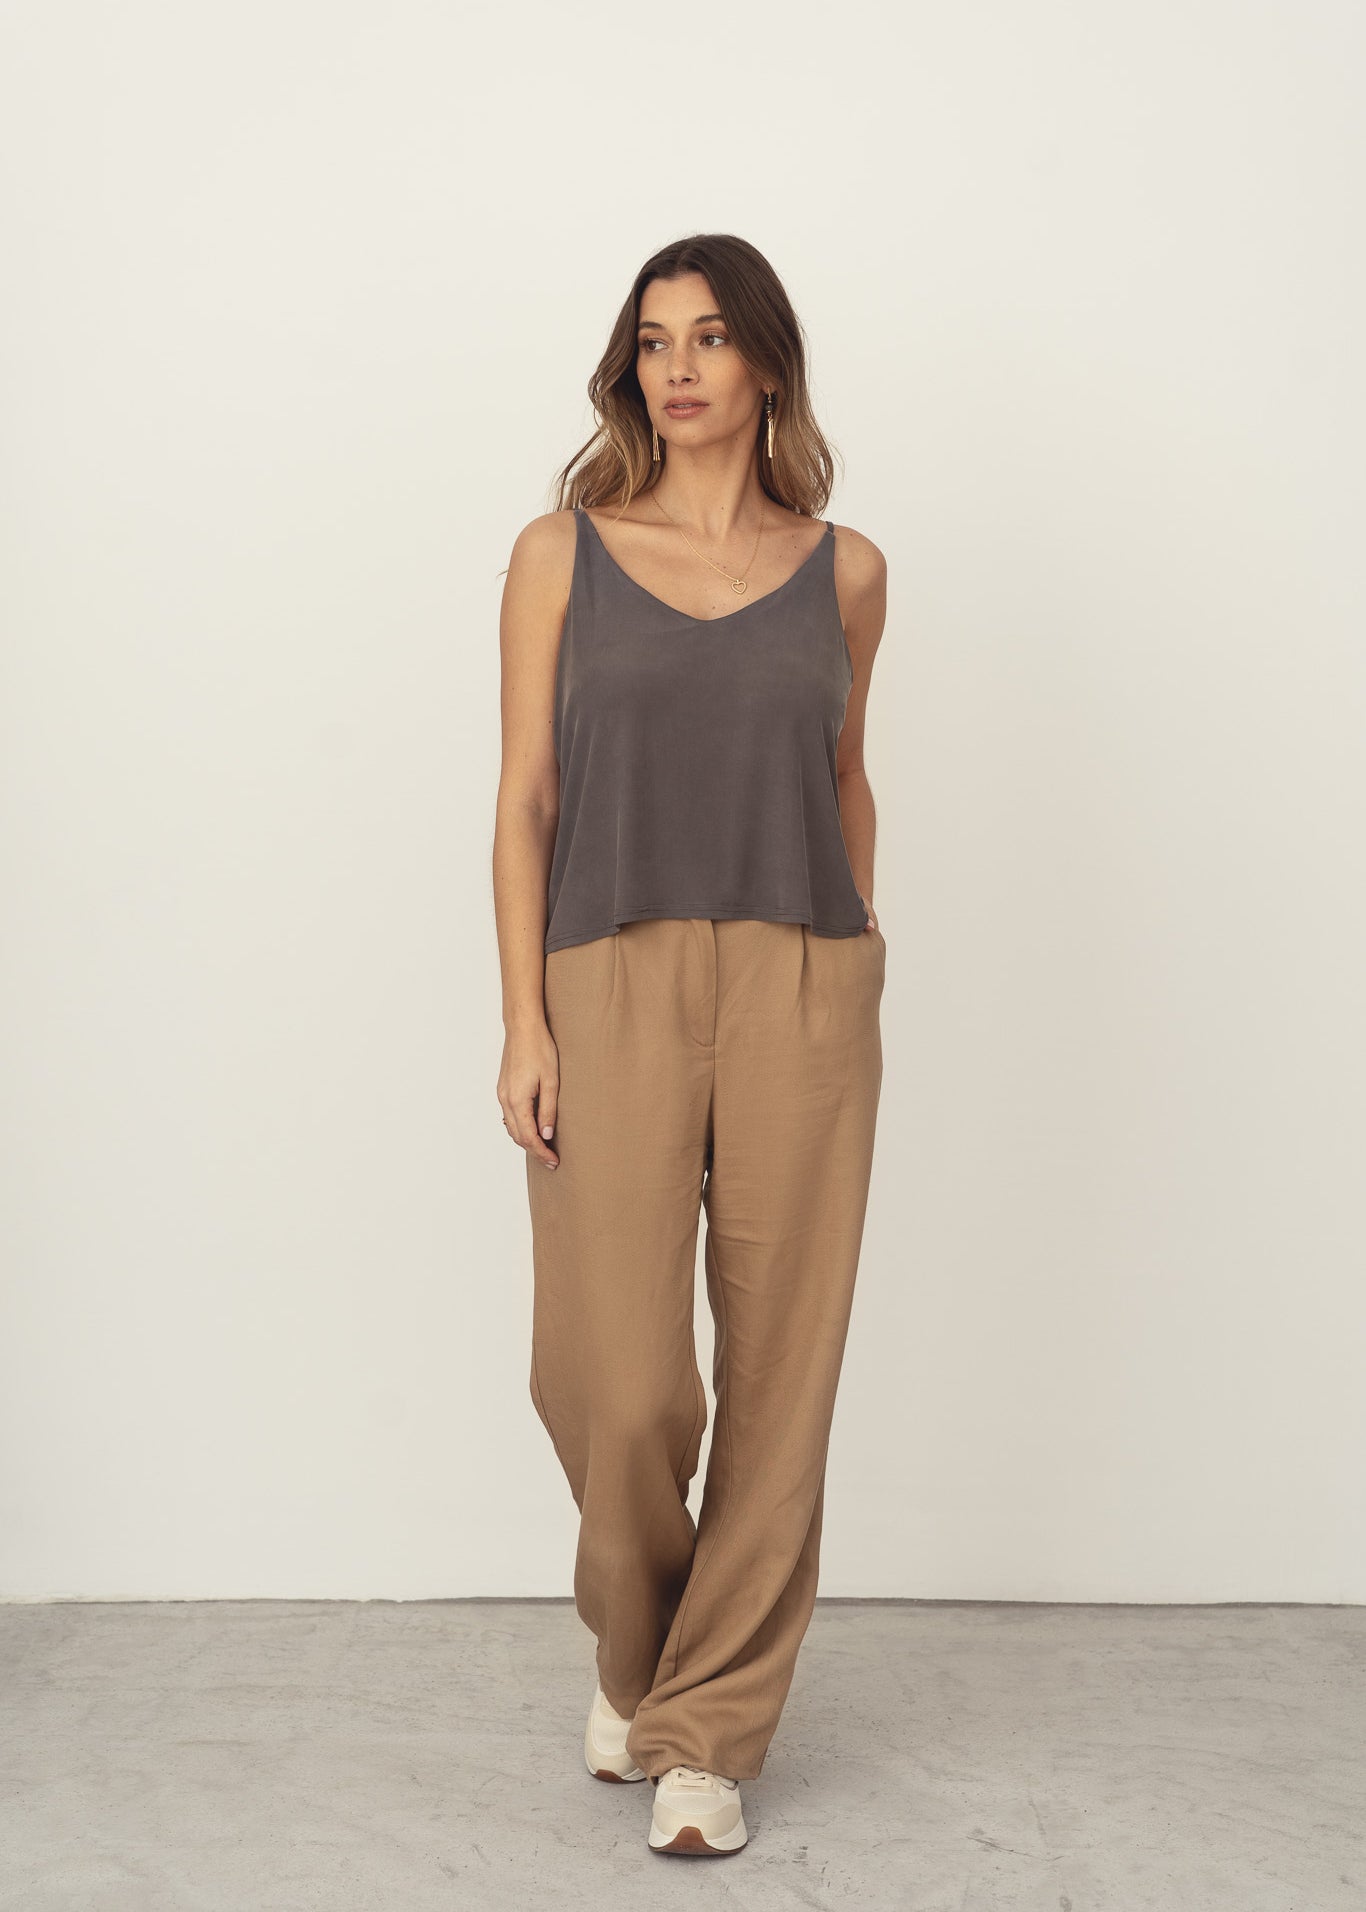 Naz women's cupro top with a v-neckline and thin straps in grey. Made in Portugal. 